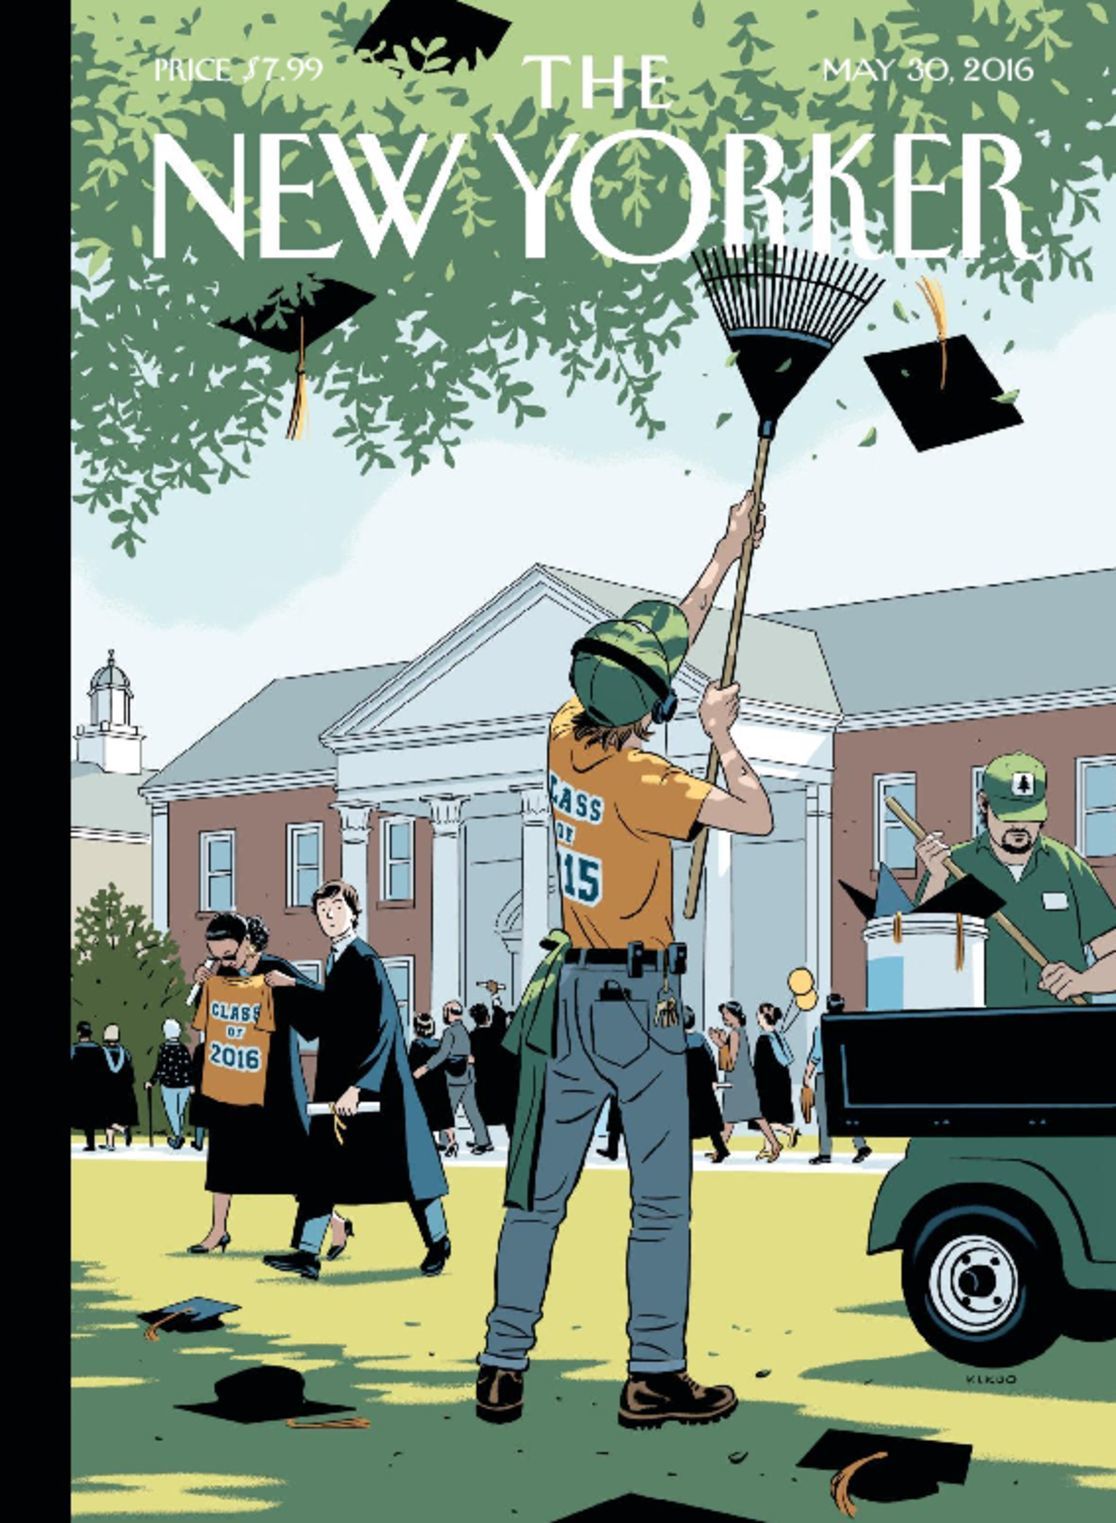 8304 The New Yorker Cover 2016 May 30 Issue 